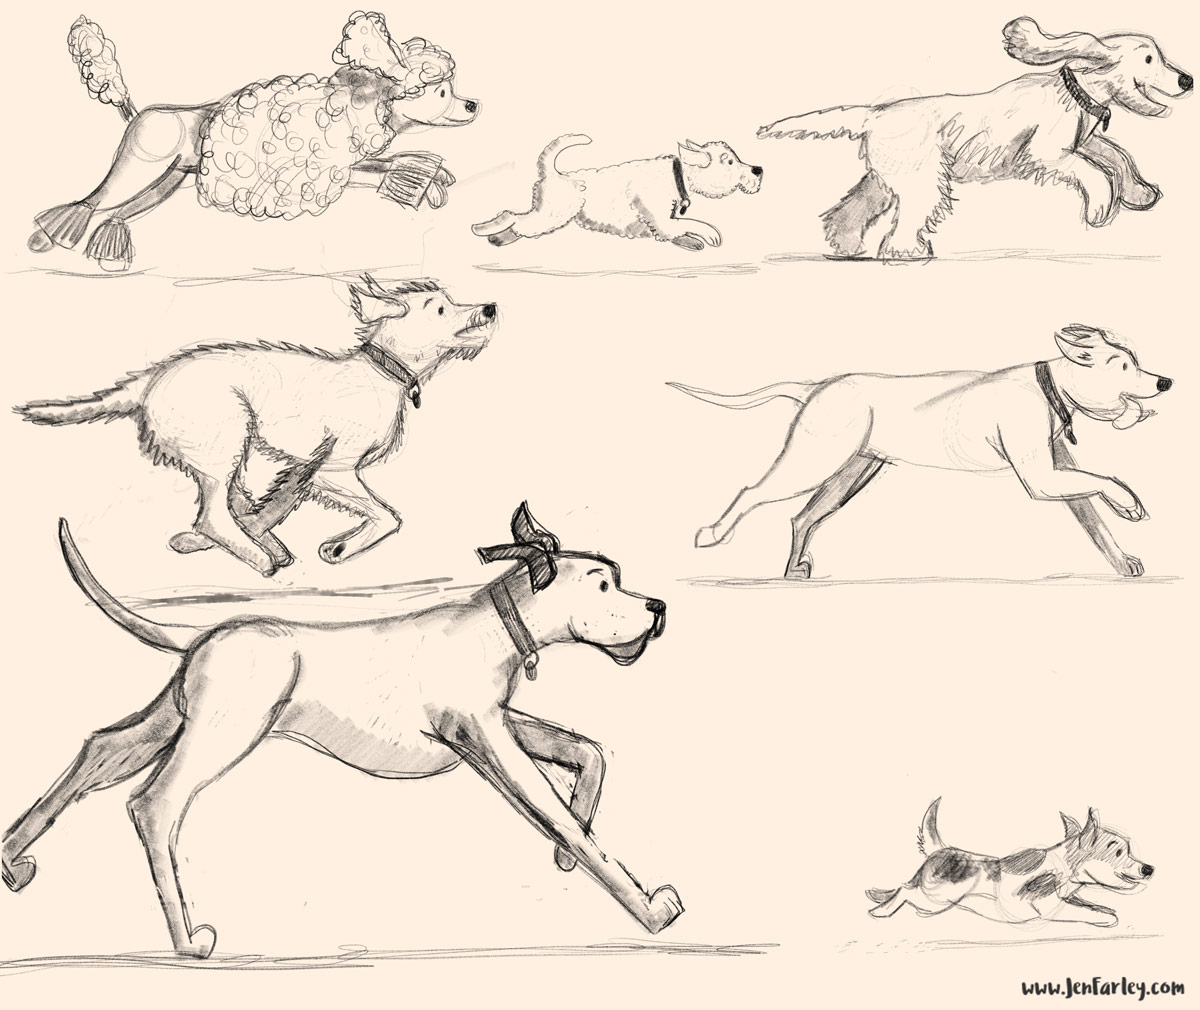 Dogs running sketchbook - Take The Lead illustrated by Jennifer Farley